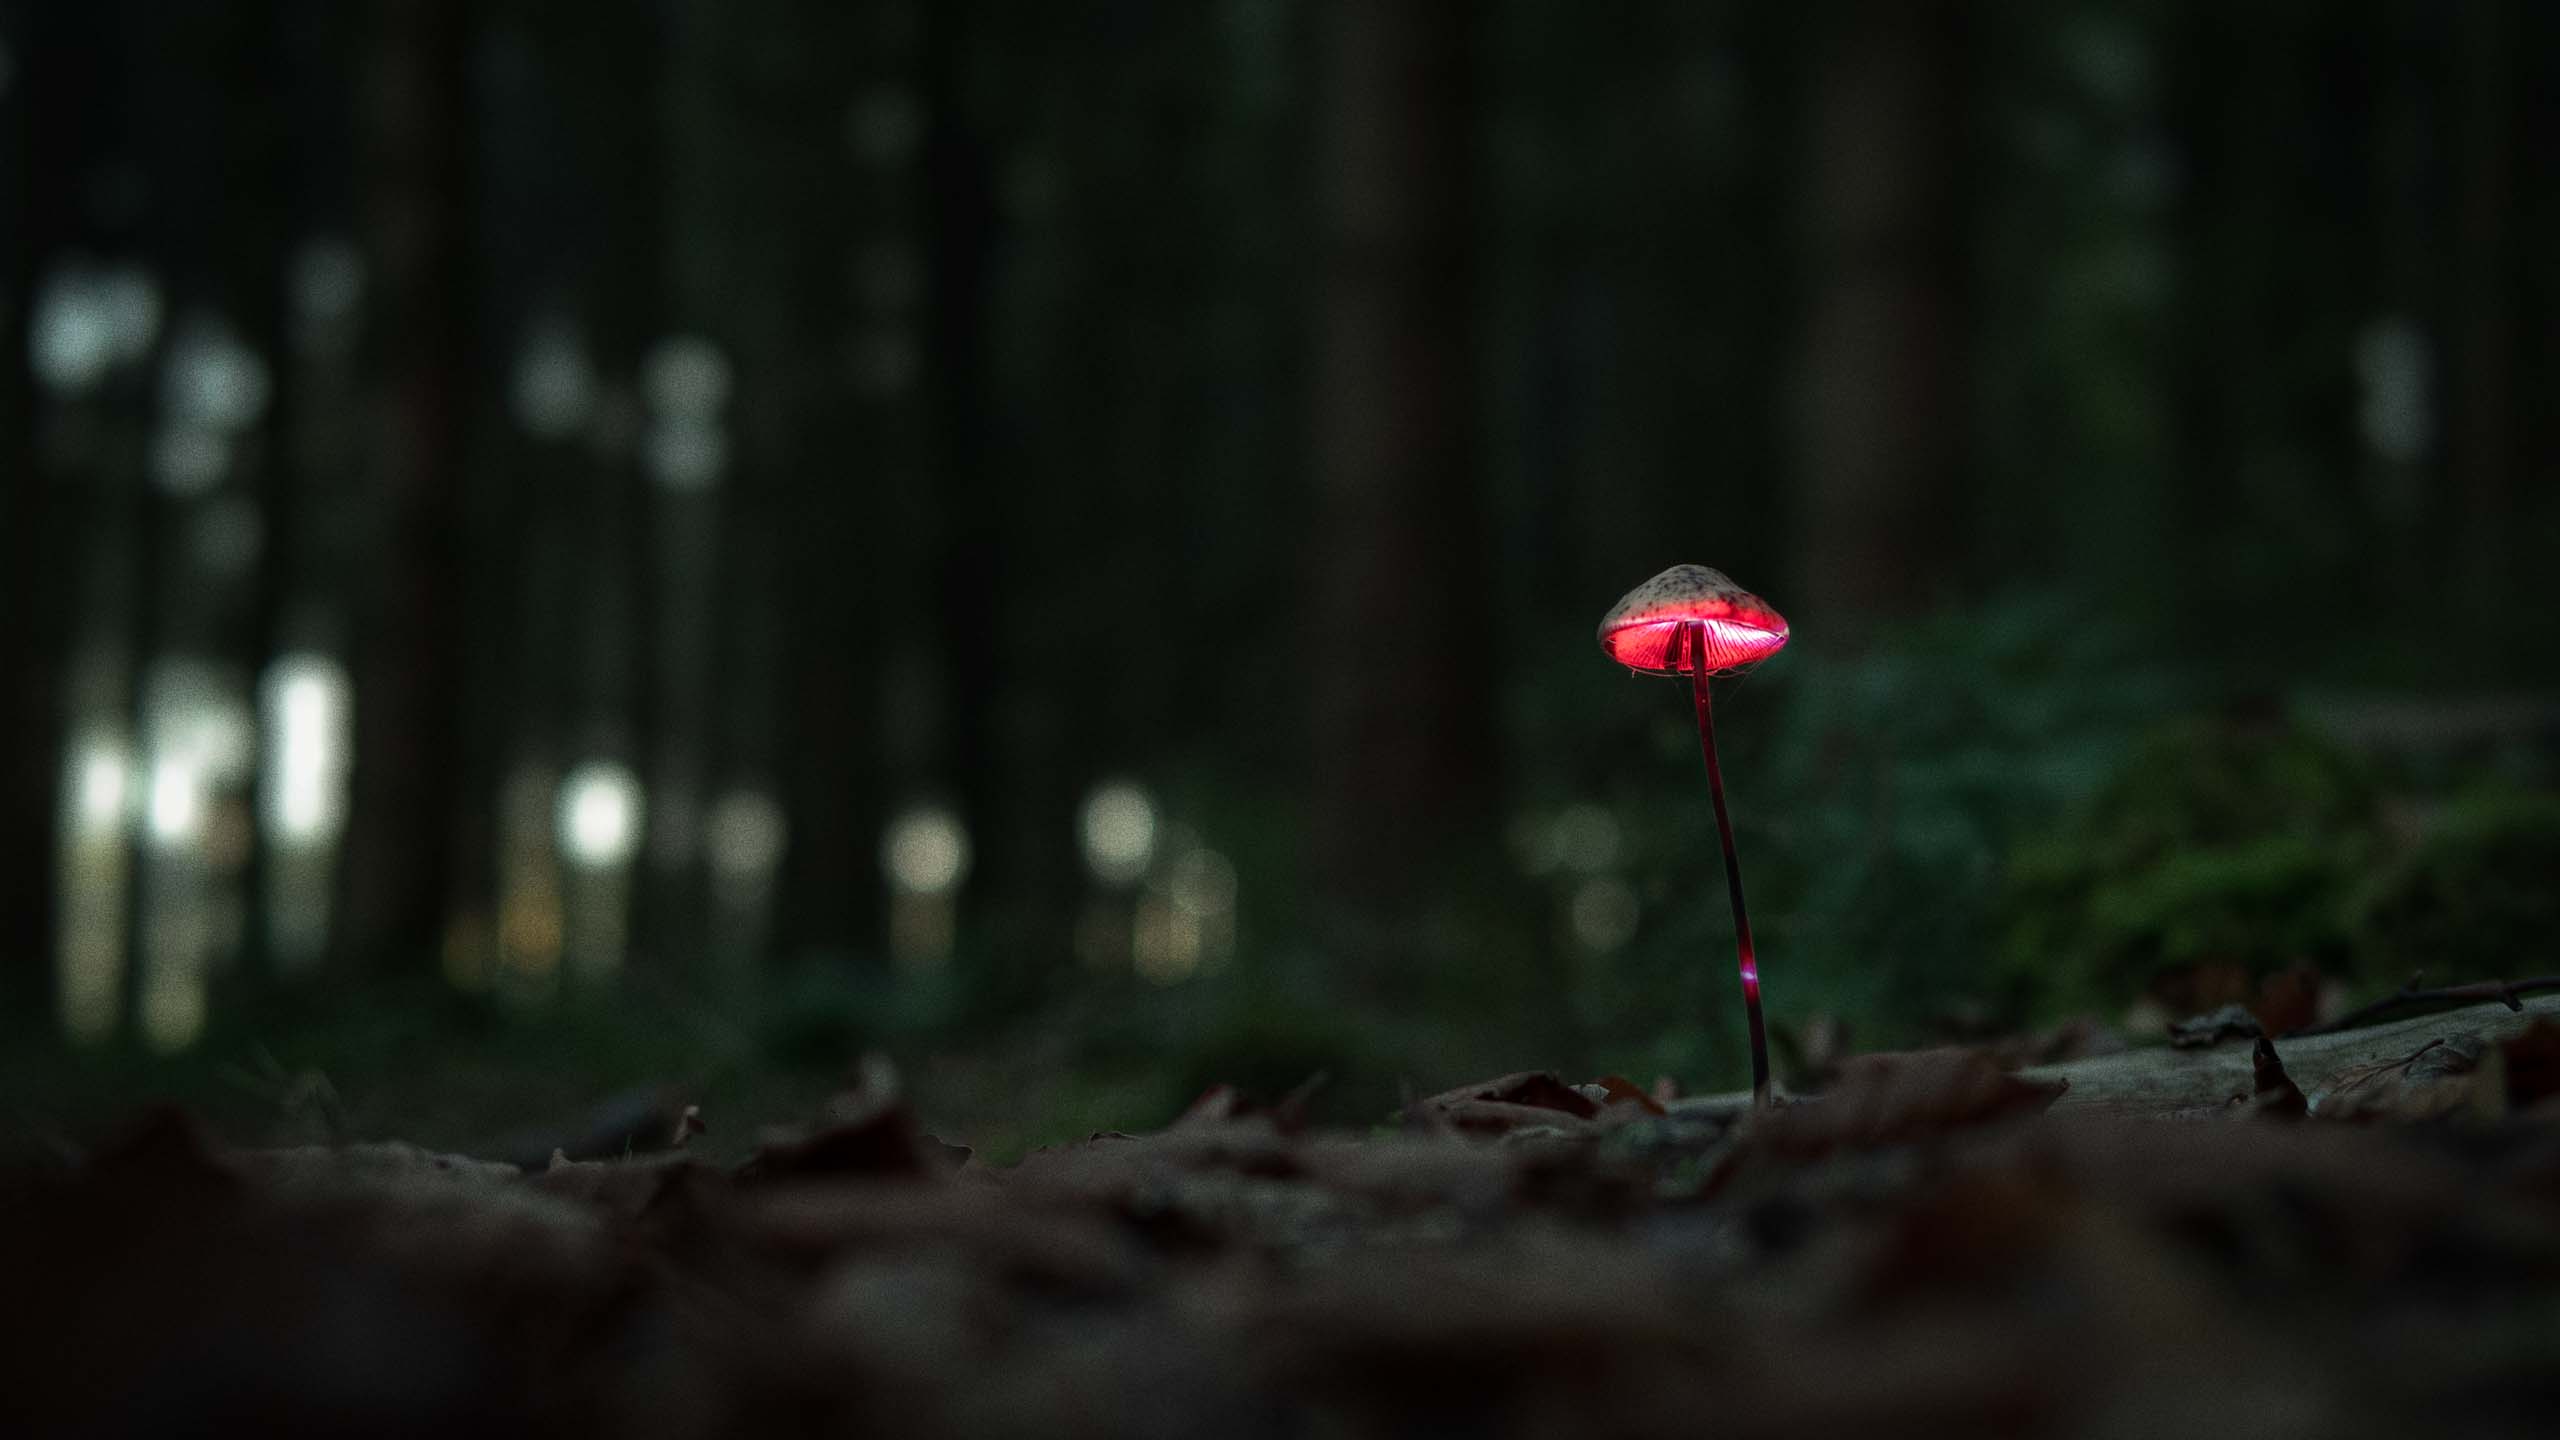 Video projection on a beautiful mushroom with red and lila visuals